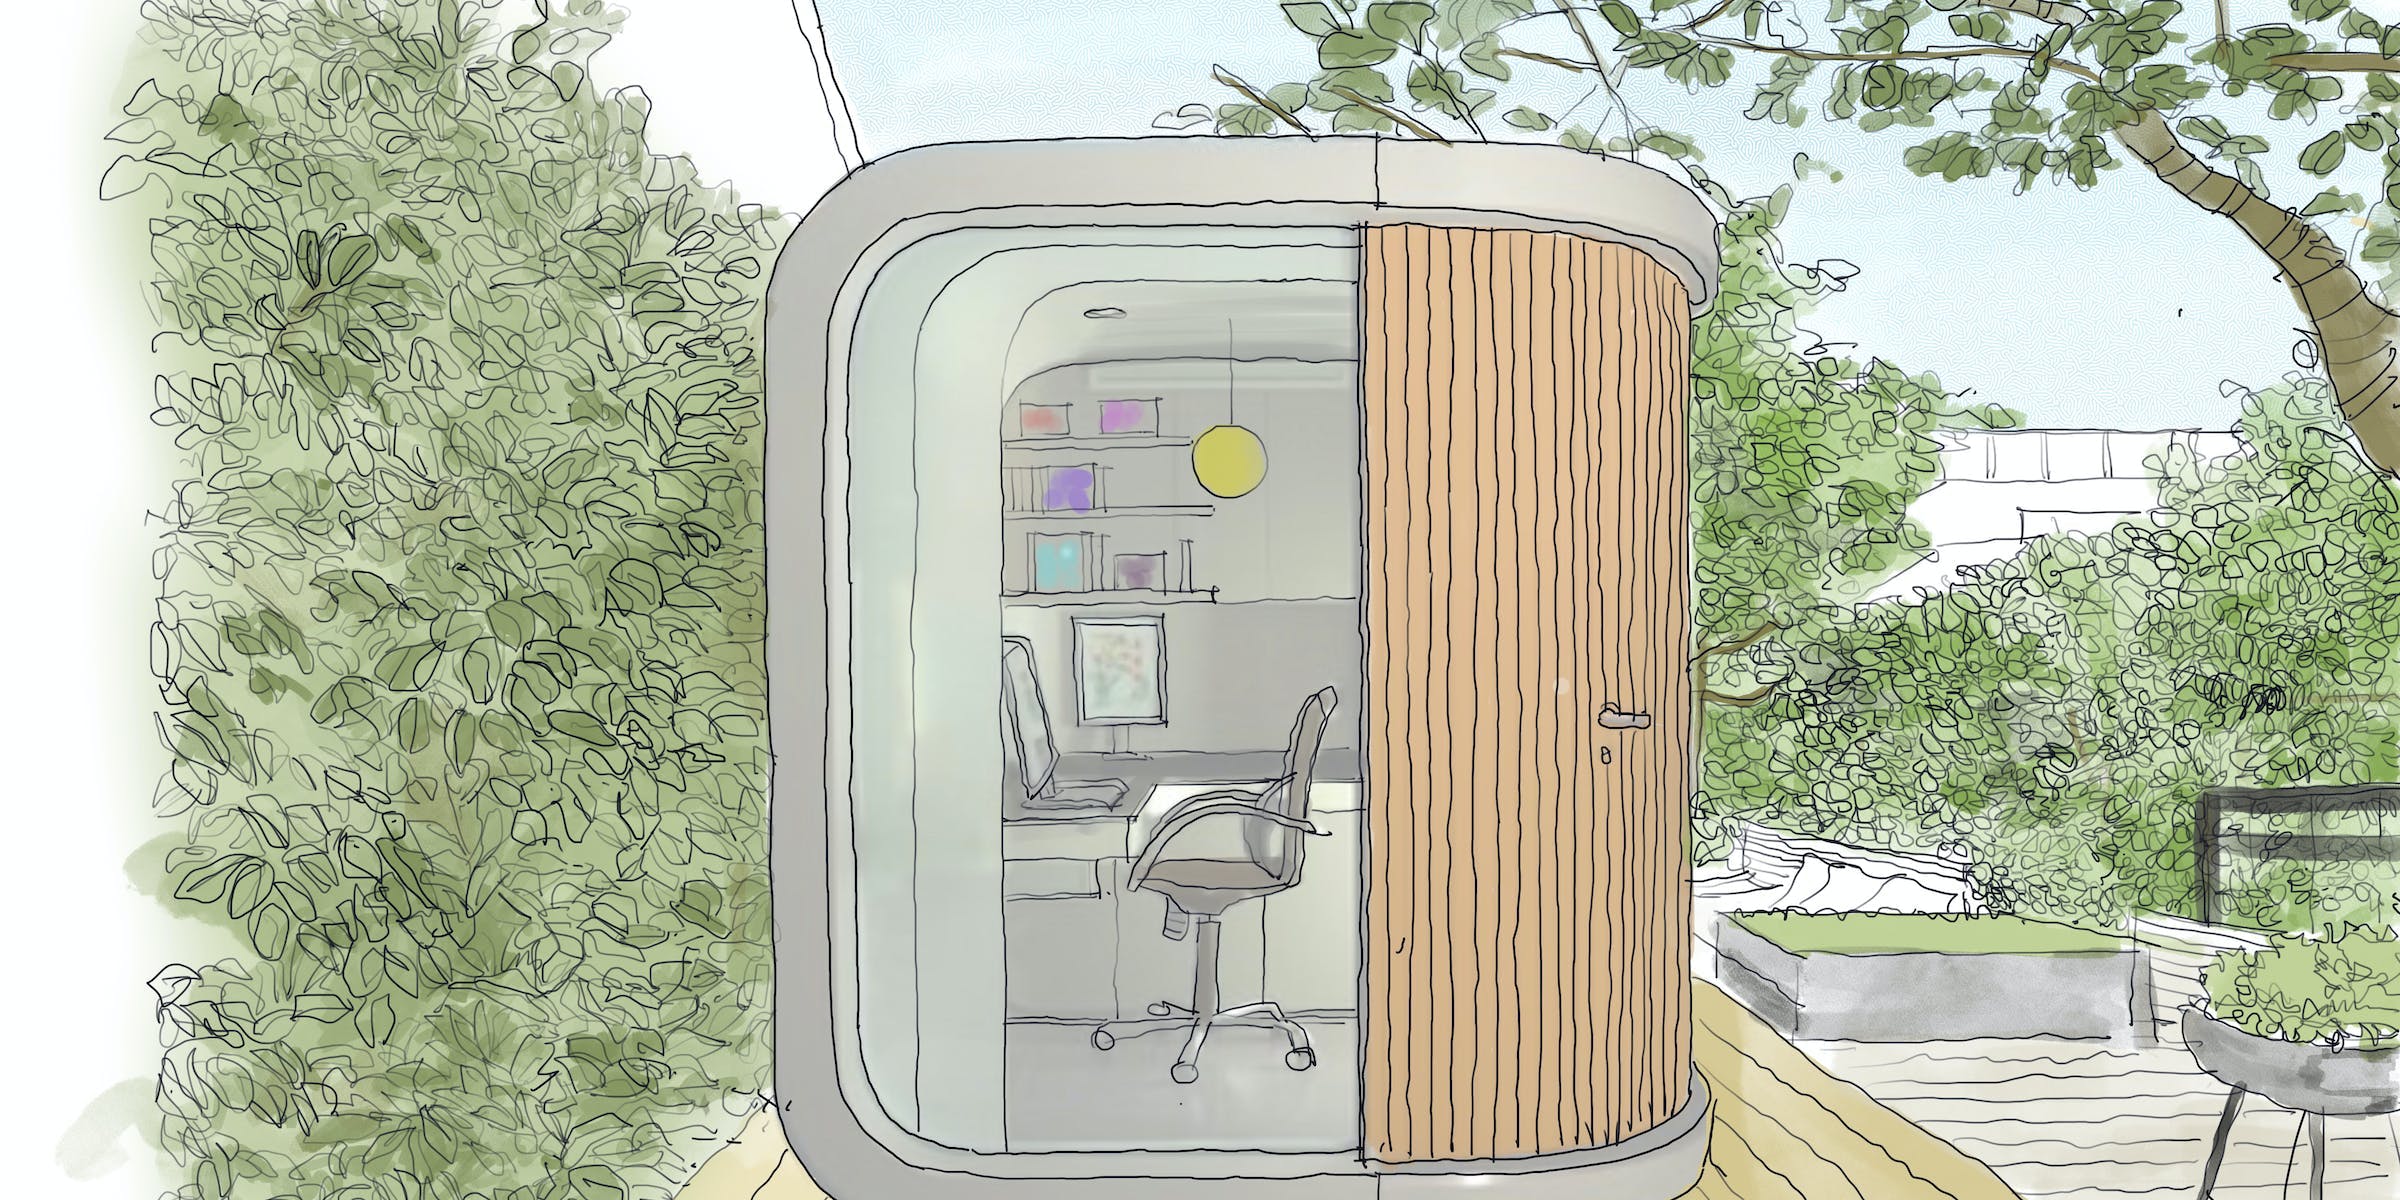 A prefabricated “office in a box” drawing